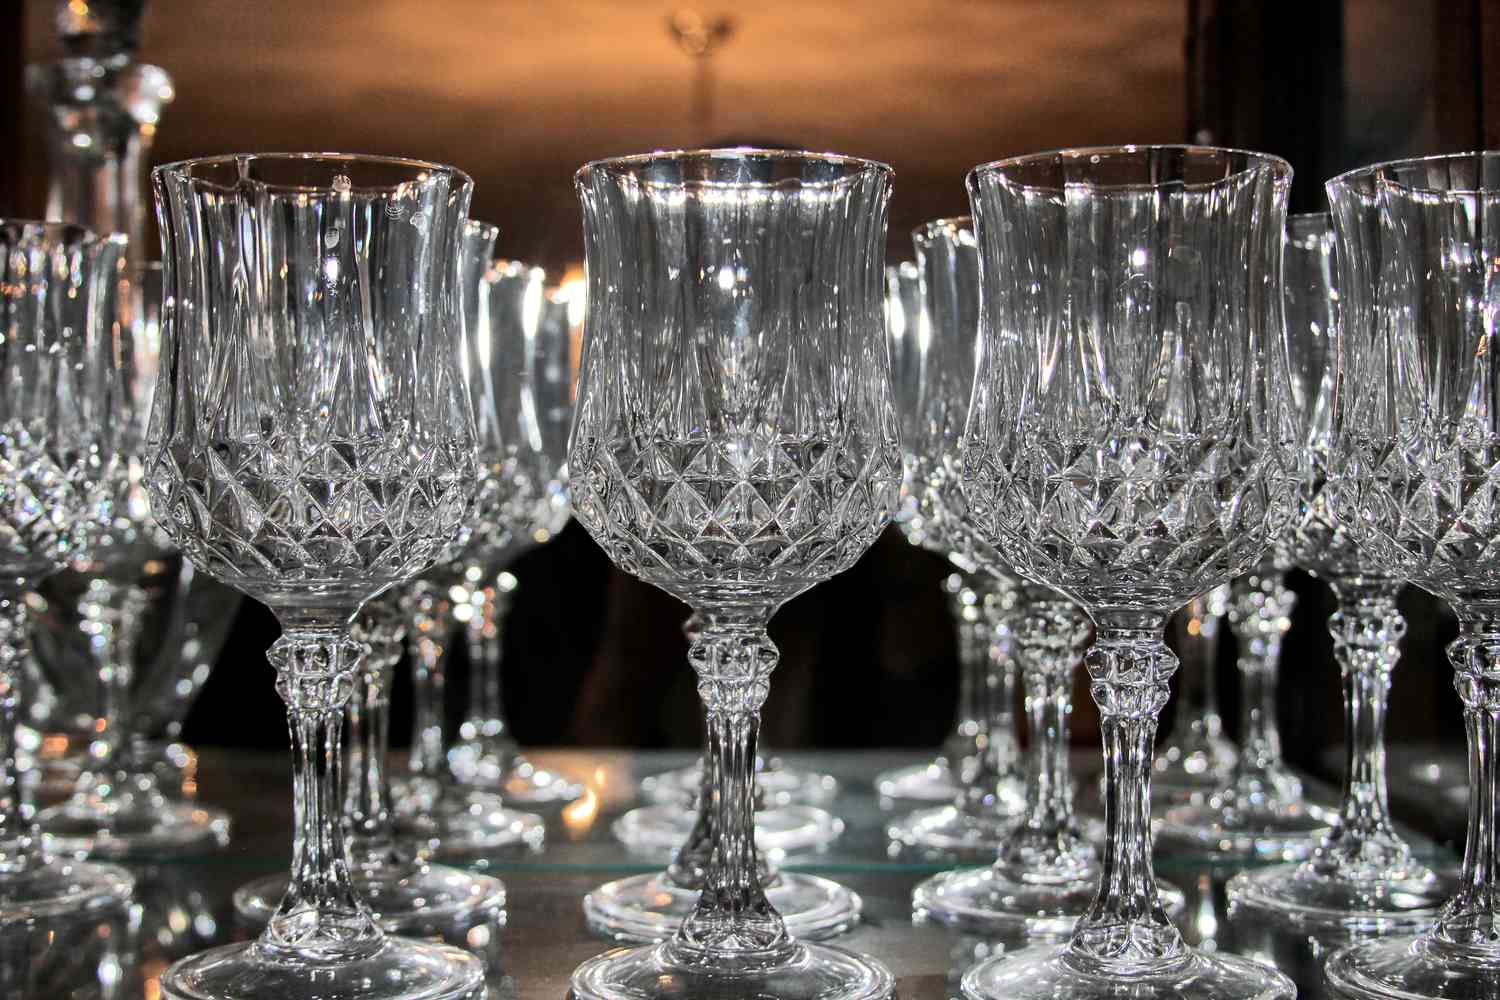 What To Do With Old Crystal Stemware?